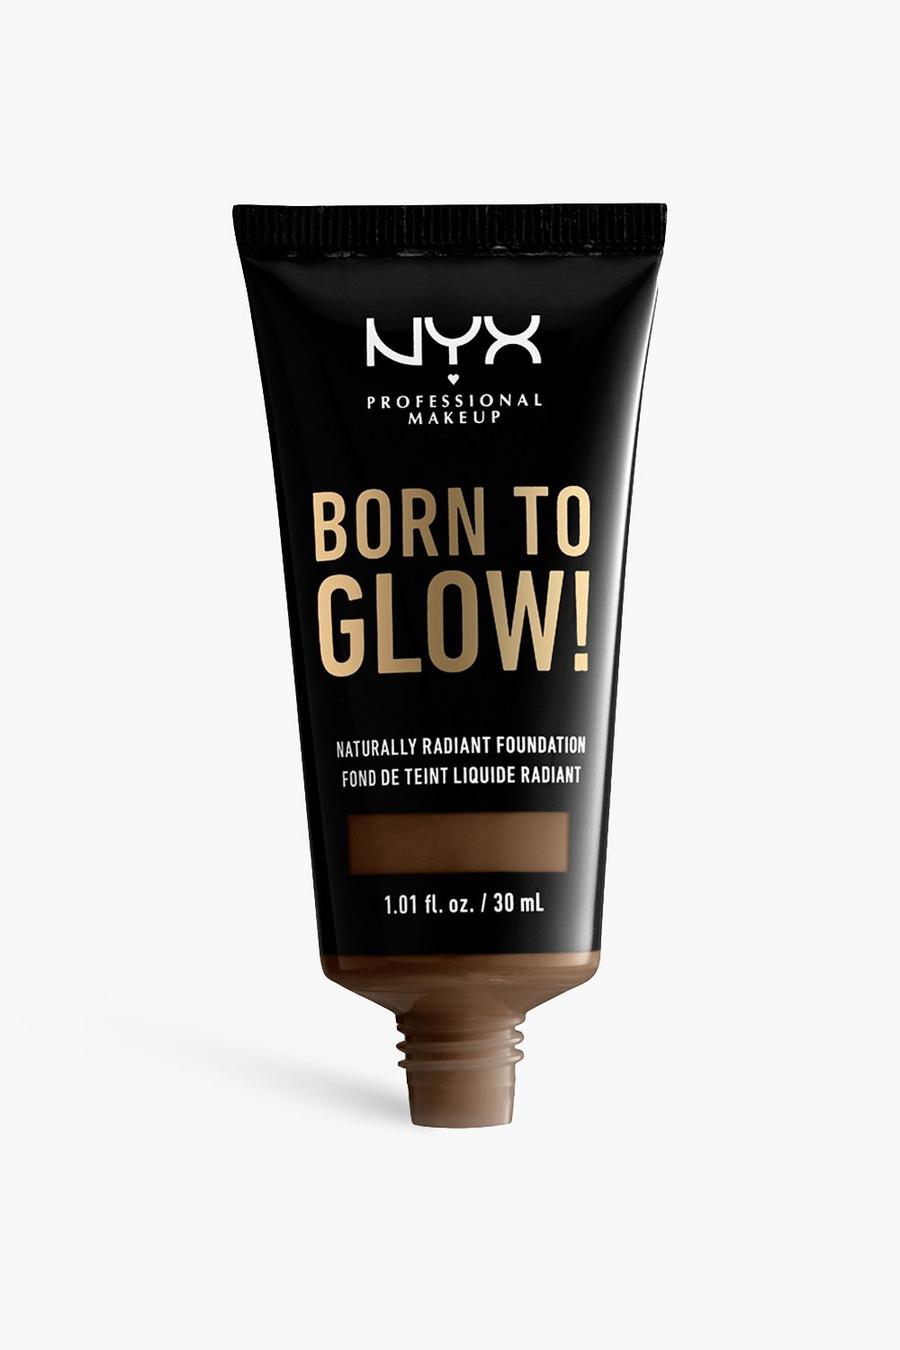 20 deep rich NYX Professional Makeup Born To Glow! Naturally Radiant Foundation